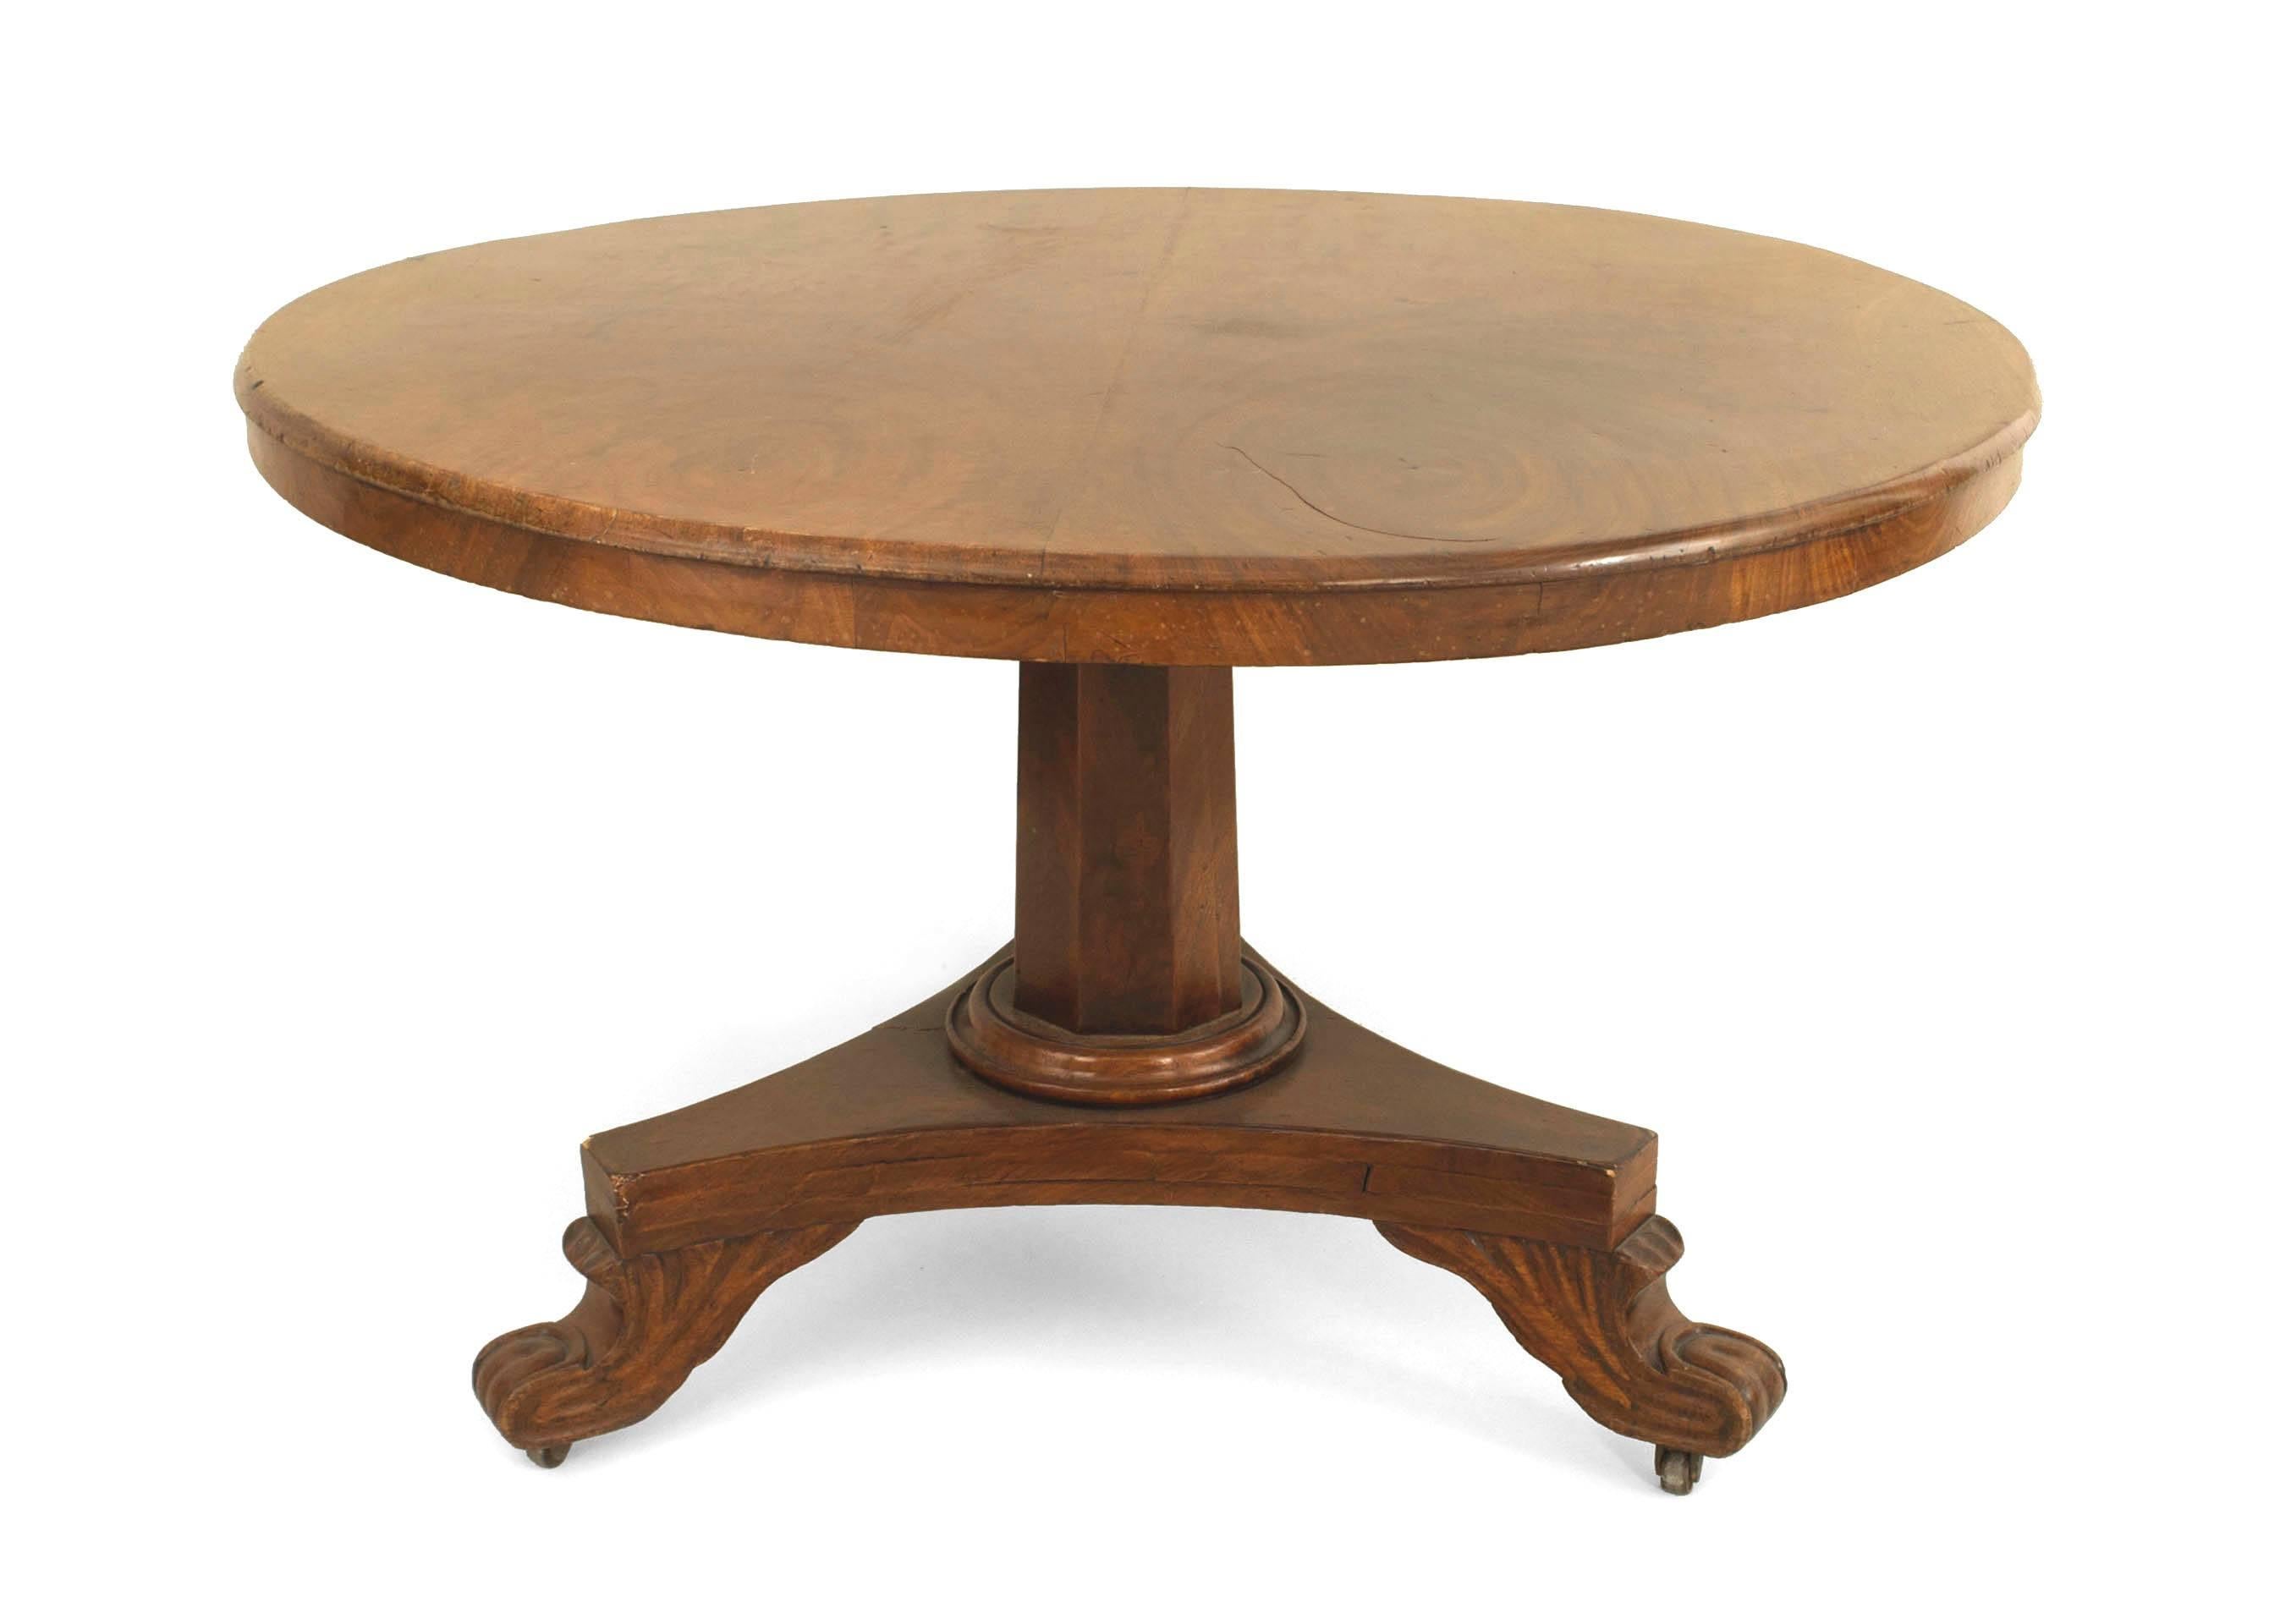 English Regency mahogany center table the bookmatched top with short apron supported by a central 6 sided pedestal column resting on a triangular base with claw feet, prior rePair to base.
